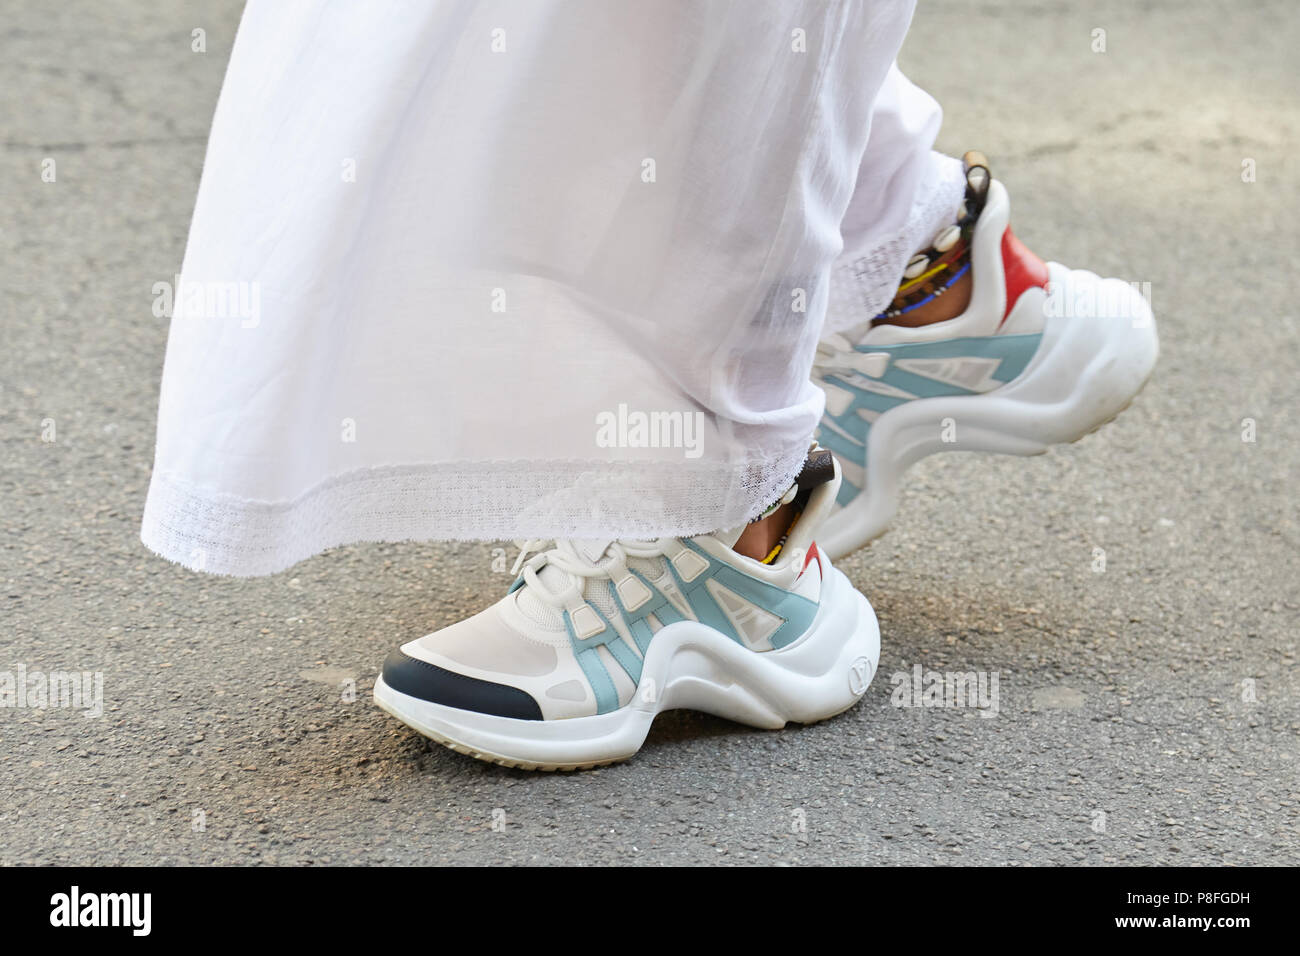 MILAN - JUNE 16: Woman with white and blue Louis Vuitton sneakers walking before Marni fashion ...